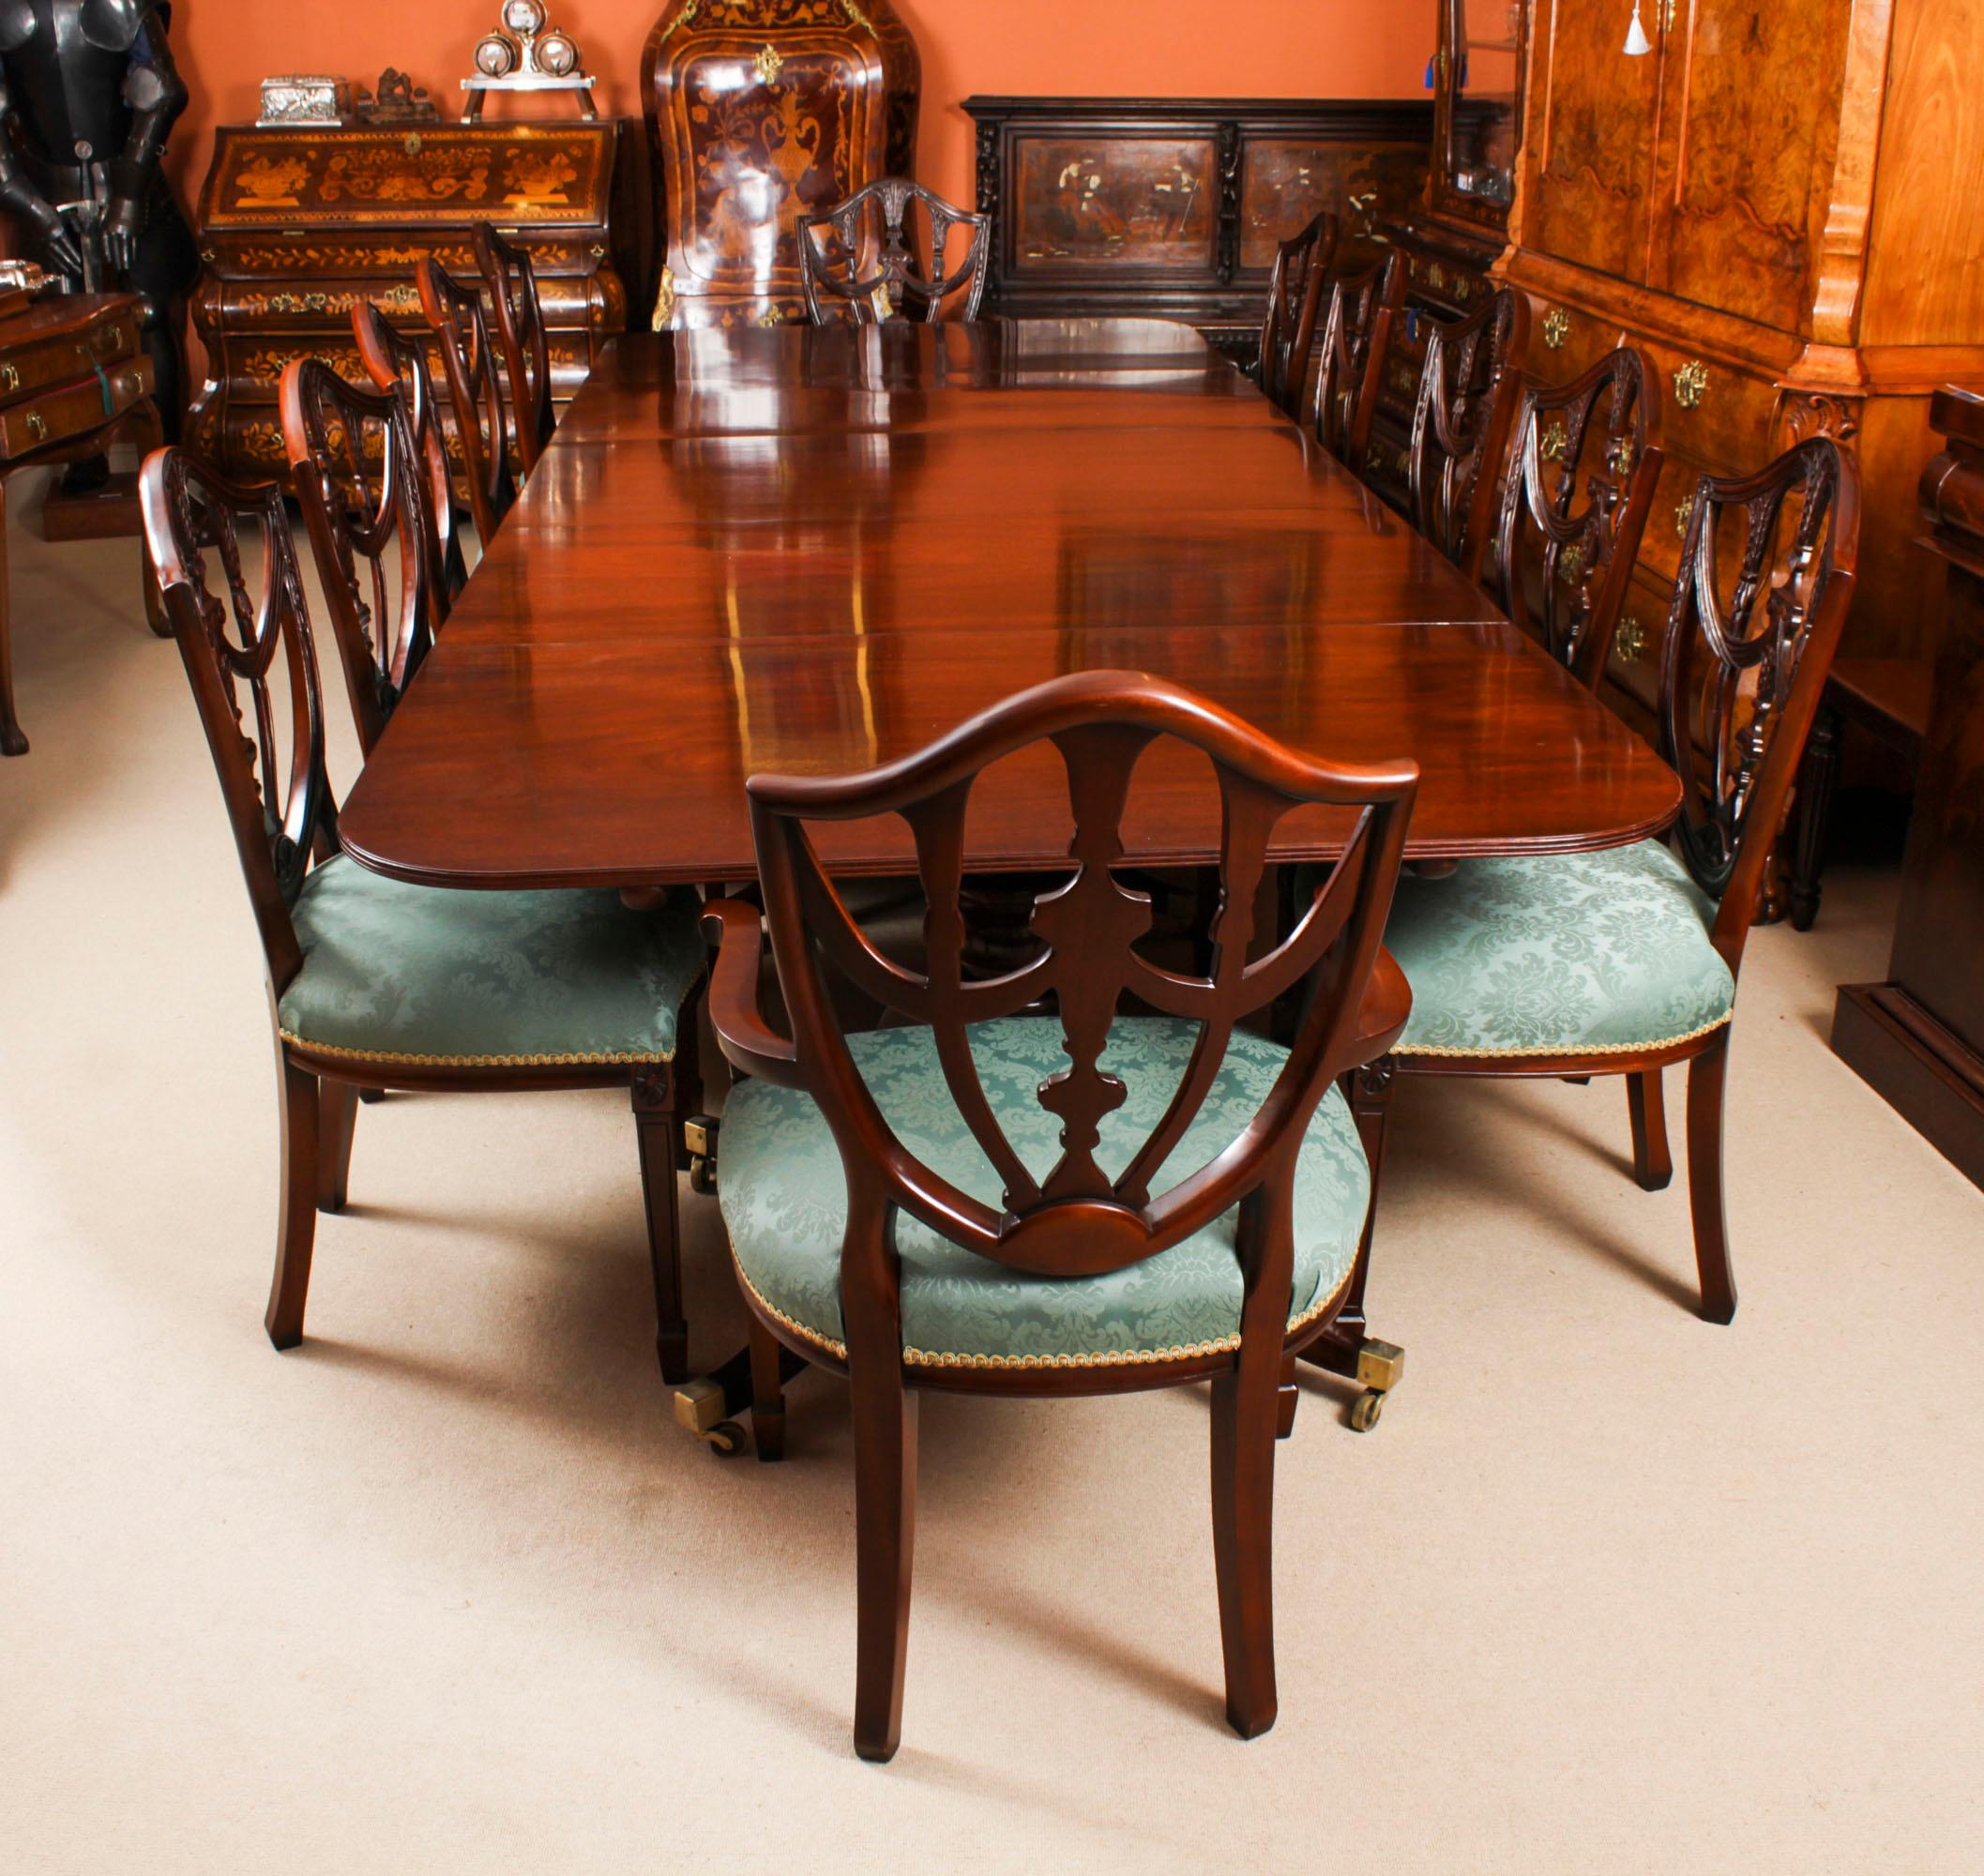 This is an elegant antique Regency dining table circa 1820 in date and twelve Federal Revival shield back dining chairs dating from the mid 20th century.

The table features elegant simplicity, with straight, unbroken surfaces and lines.  It has two